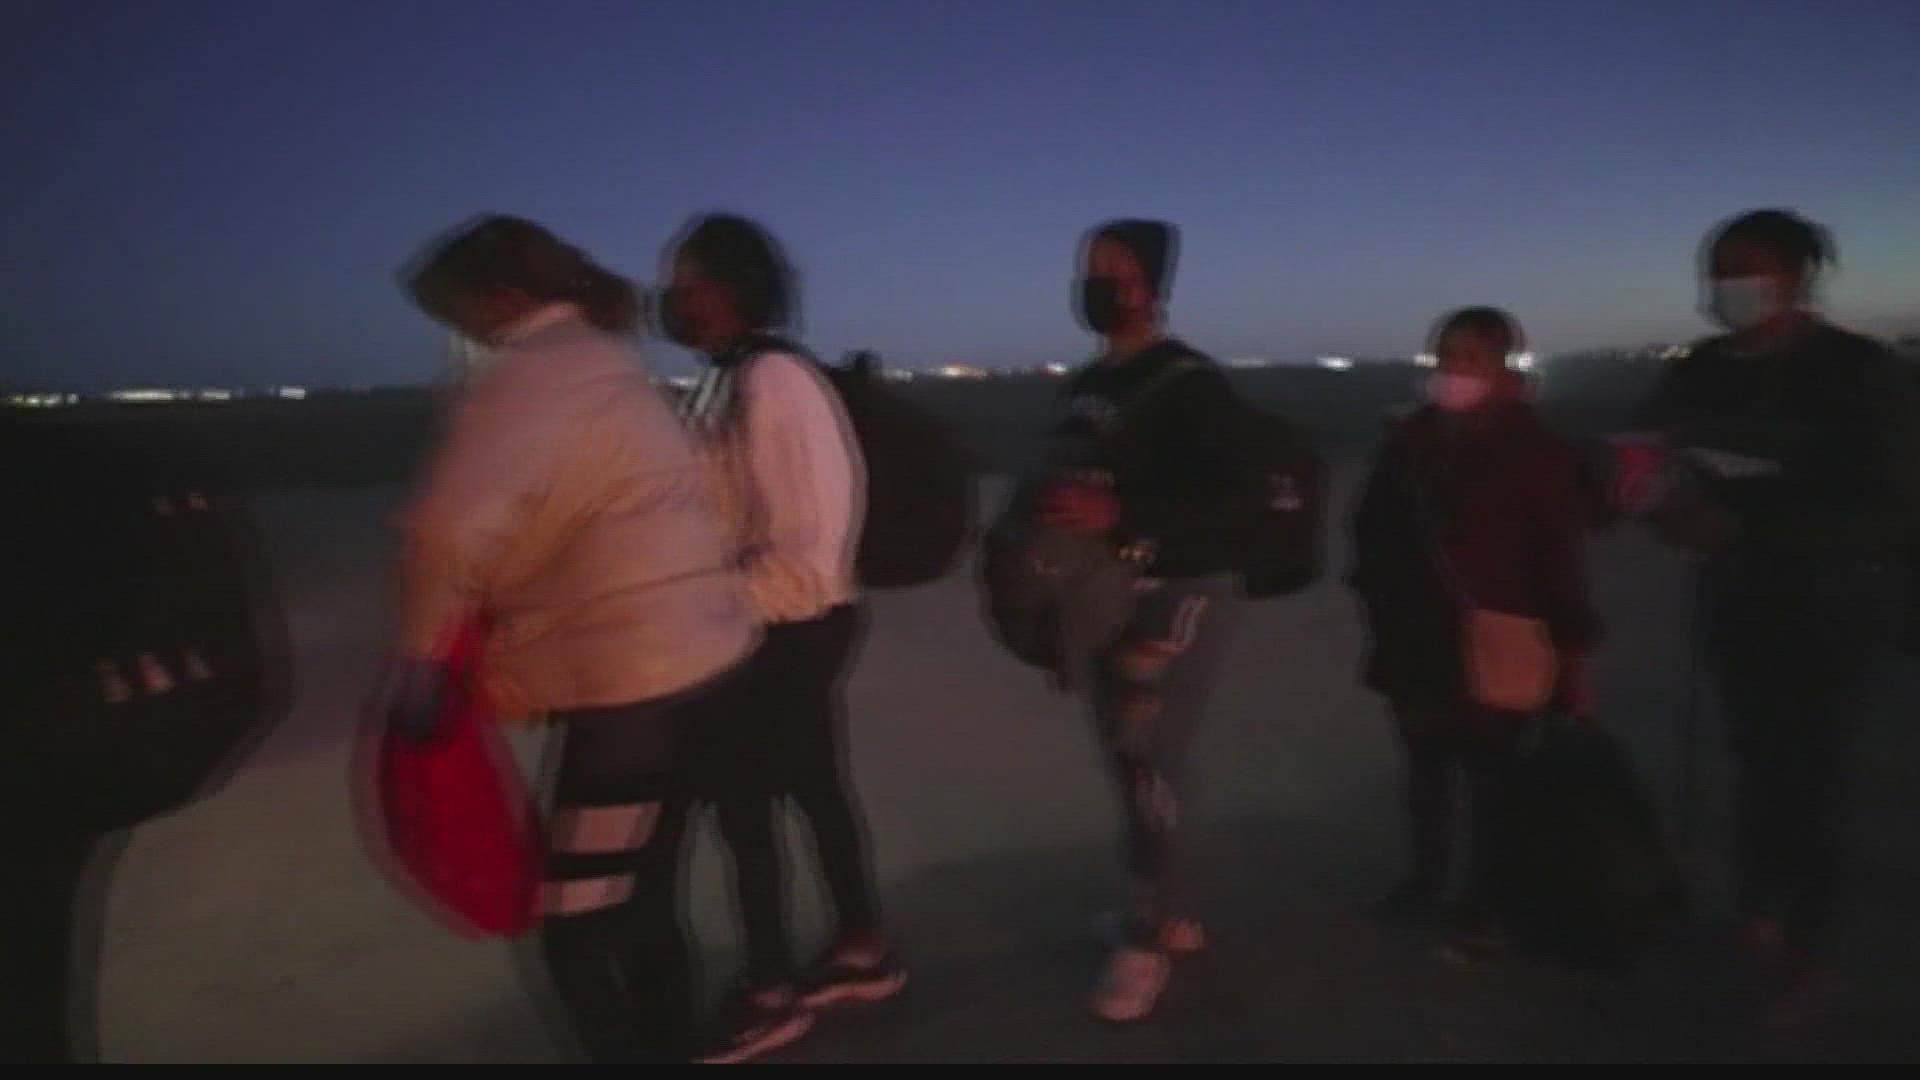 A concerning trend continues to grow in Arizona. Immigration advocates say human trafficking of migrants continues to plague the state and the Valley.